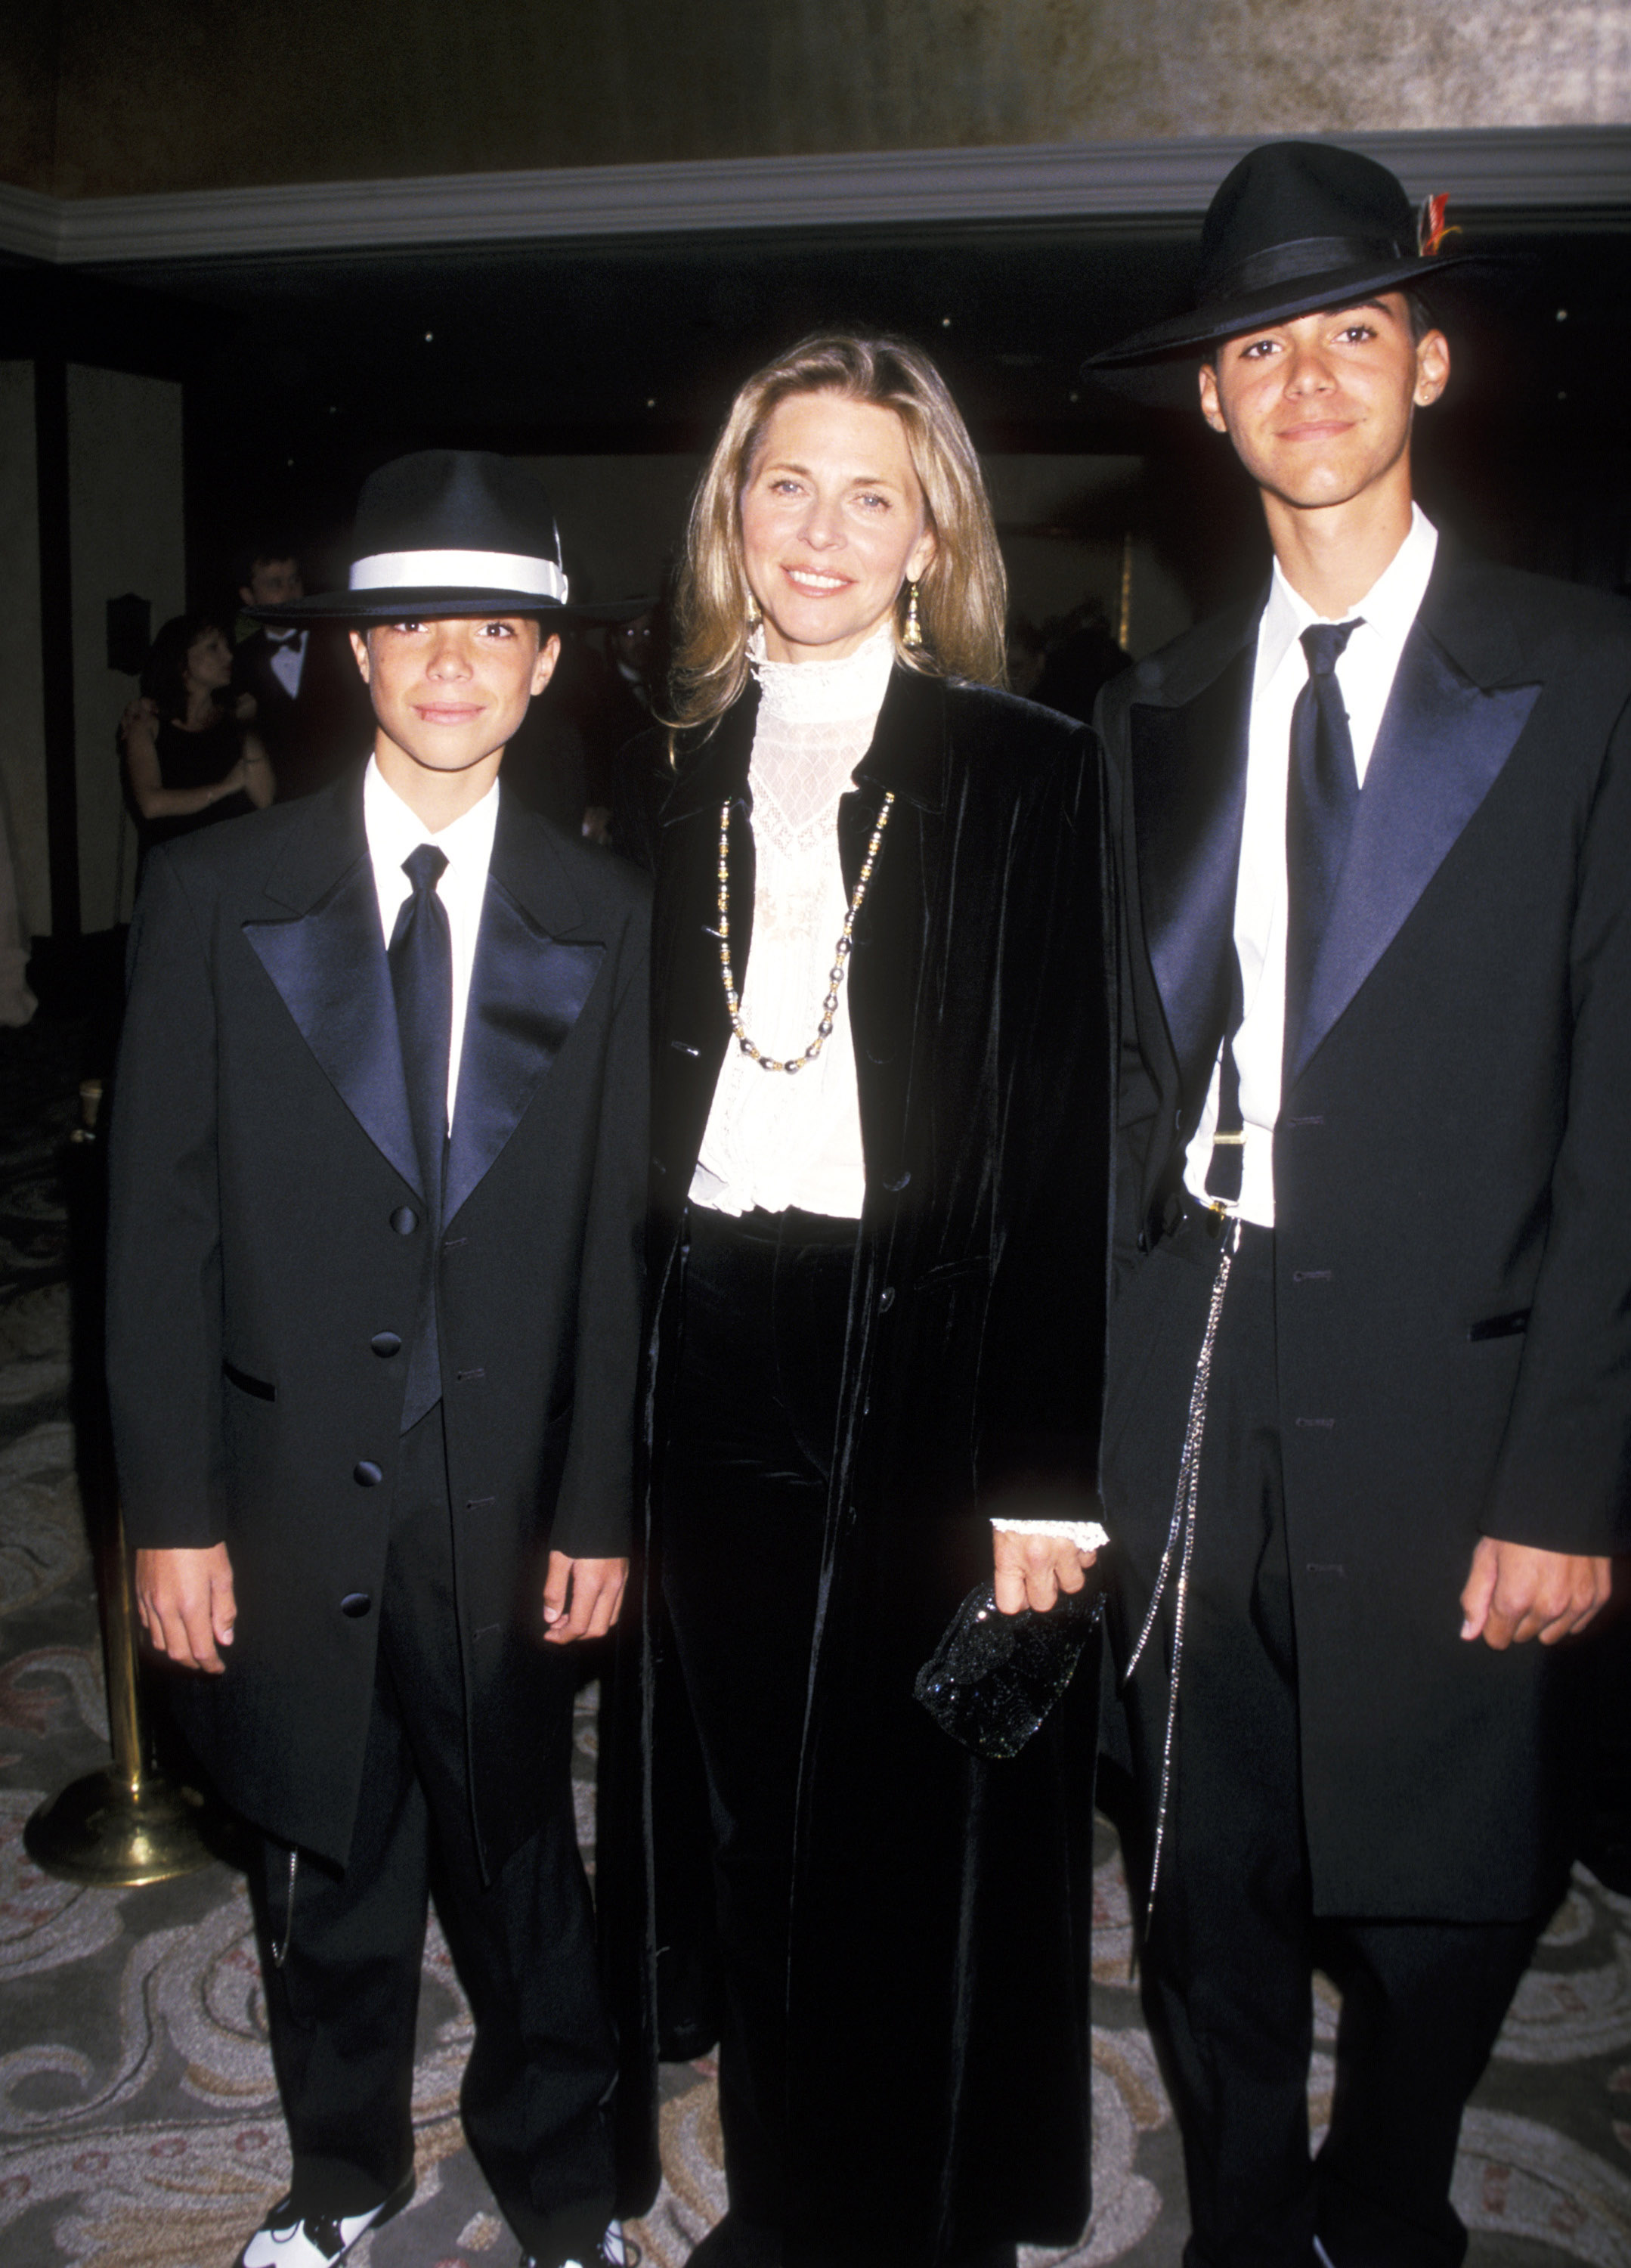 Lindsay Wagner and sons Alex Kinji and Dorian Kinji in Los Angeles on September 26, 1999 | Source: Getty Images